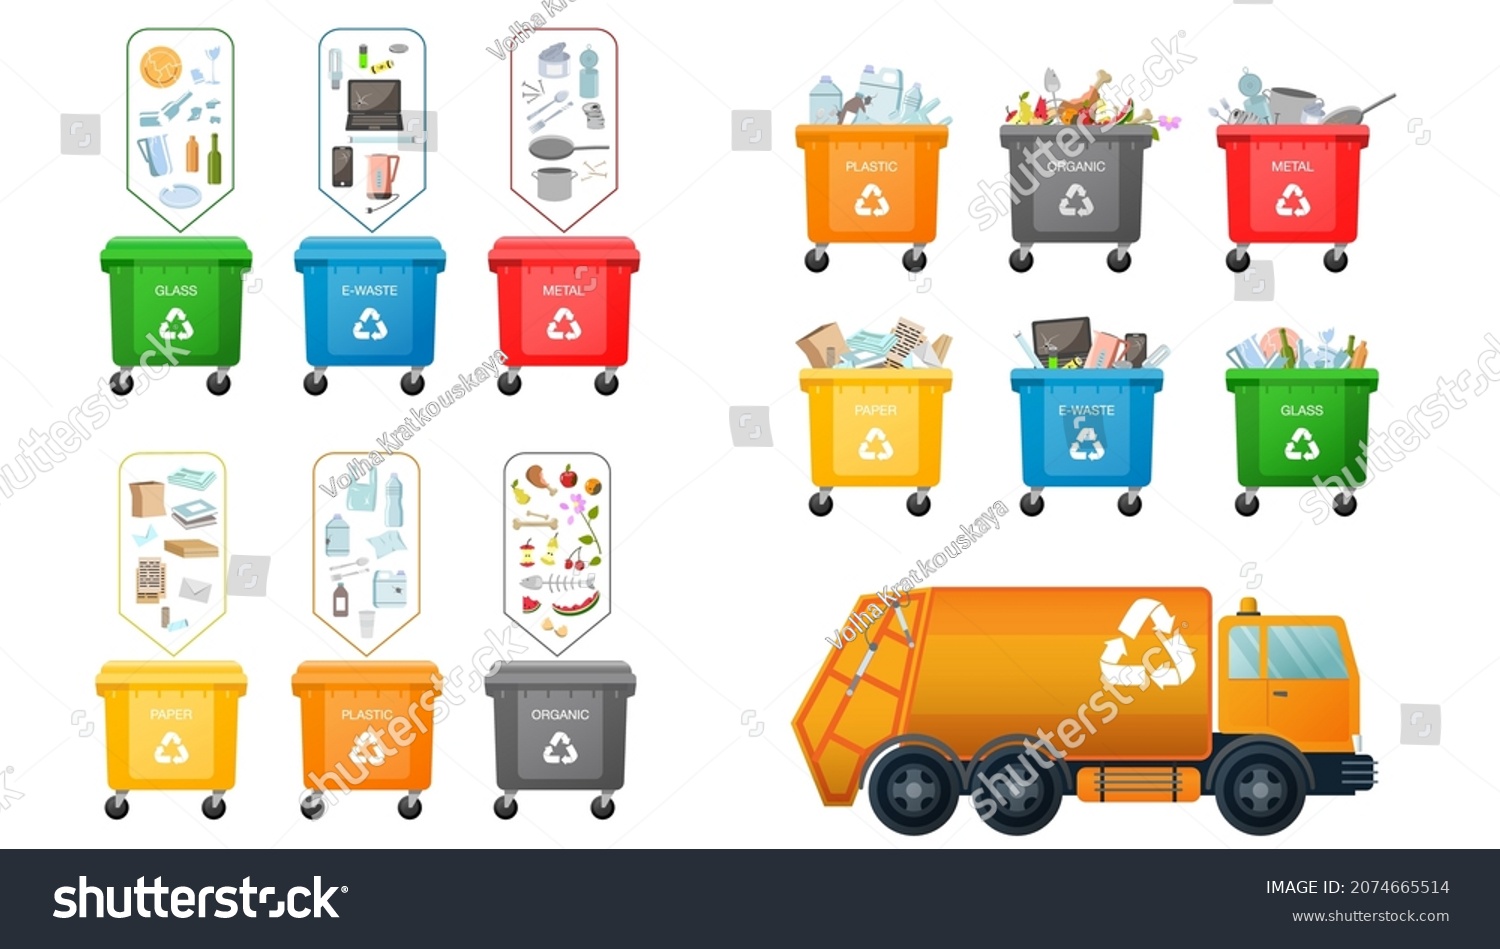 SVG of Plastic bins and truck for garbage. Vector set with Garbage trucks with frontal loader and containers for different types of trash: Organic, Plastic, Metal, Paper, Glass, E-waste. Waste management svg